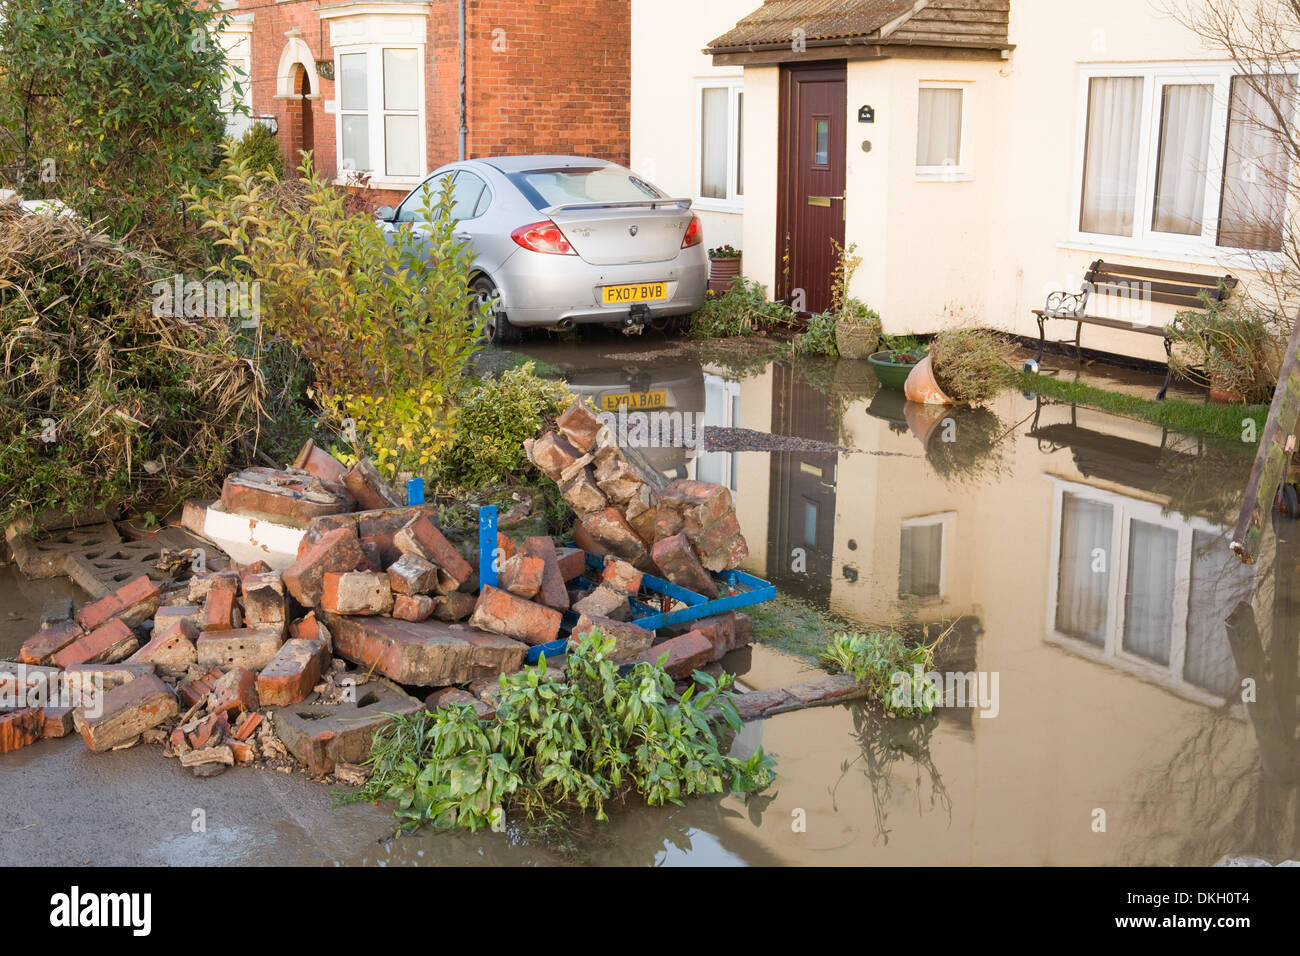 South Ferriby, North Lincolnshire, England, UK. 6th December 2013. A property in the North Lincolnshire village of South Ferriby near the River Humber, which has been damaged by the tidal surge. South Ferriby, North Lincolnshire, England, UK. 6th December 2013. Credit:  LEE BEEL/Alamy Live News Stock Photo